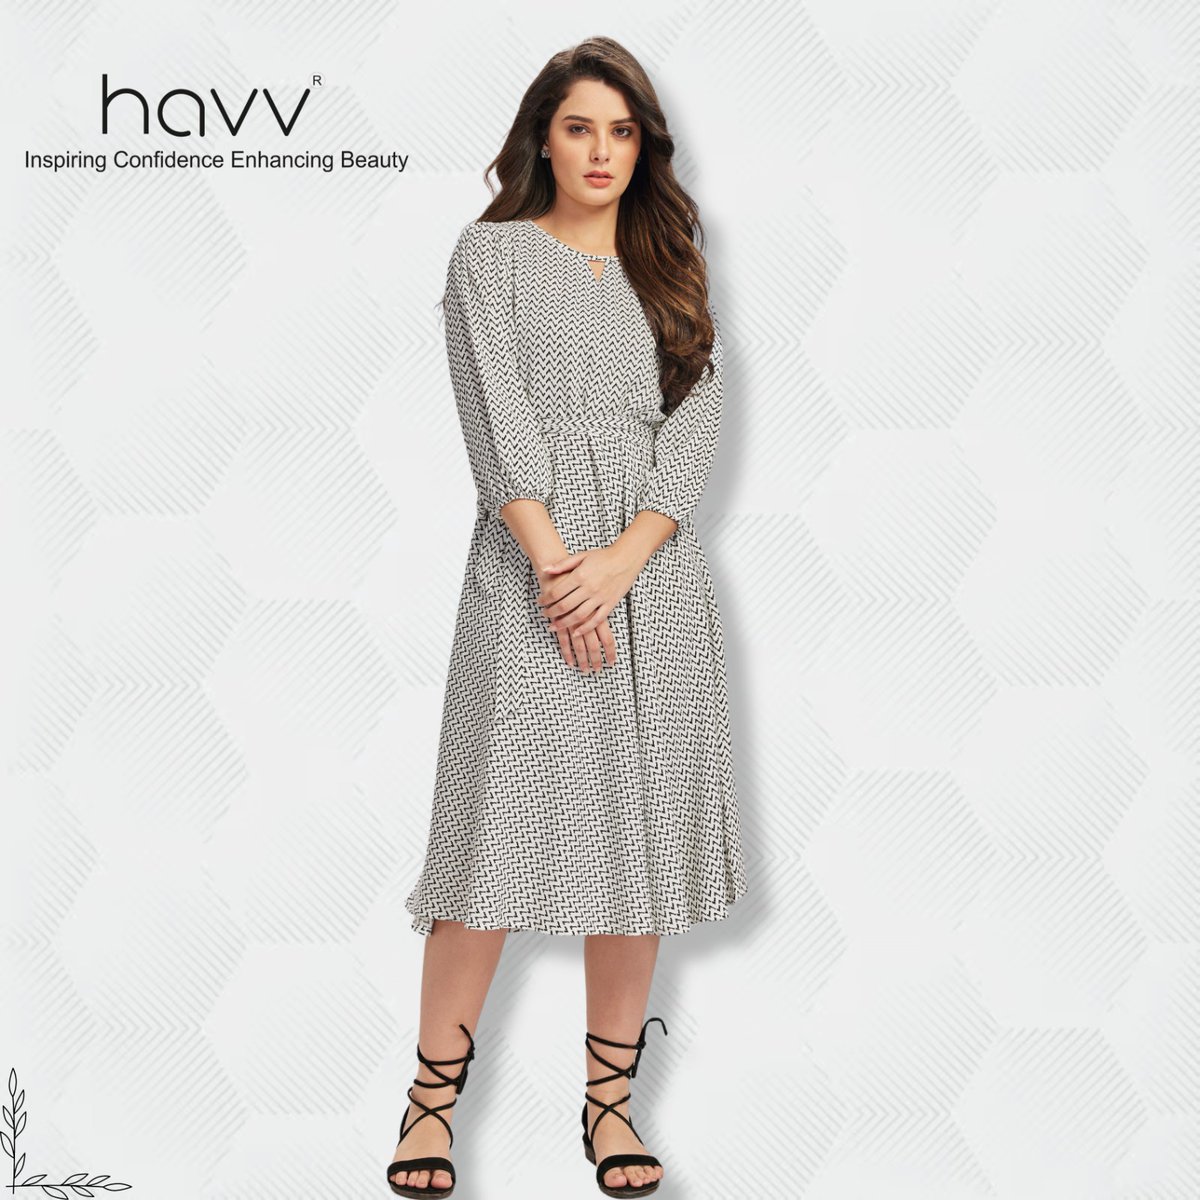 Stay effortlessly chic with Havv Fashion's white smart casual attire – where sophistication meets comfort

#HavvFashion #SmartCasual #WhiteElegance #ChicStyle #EffortlessFashion #ModernWardrobe